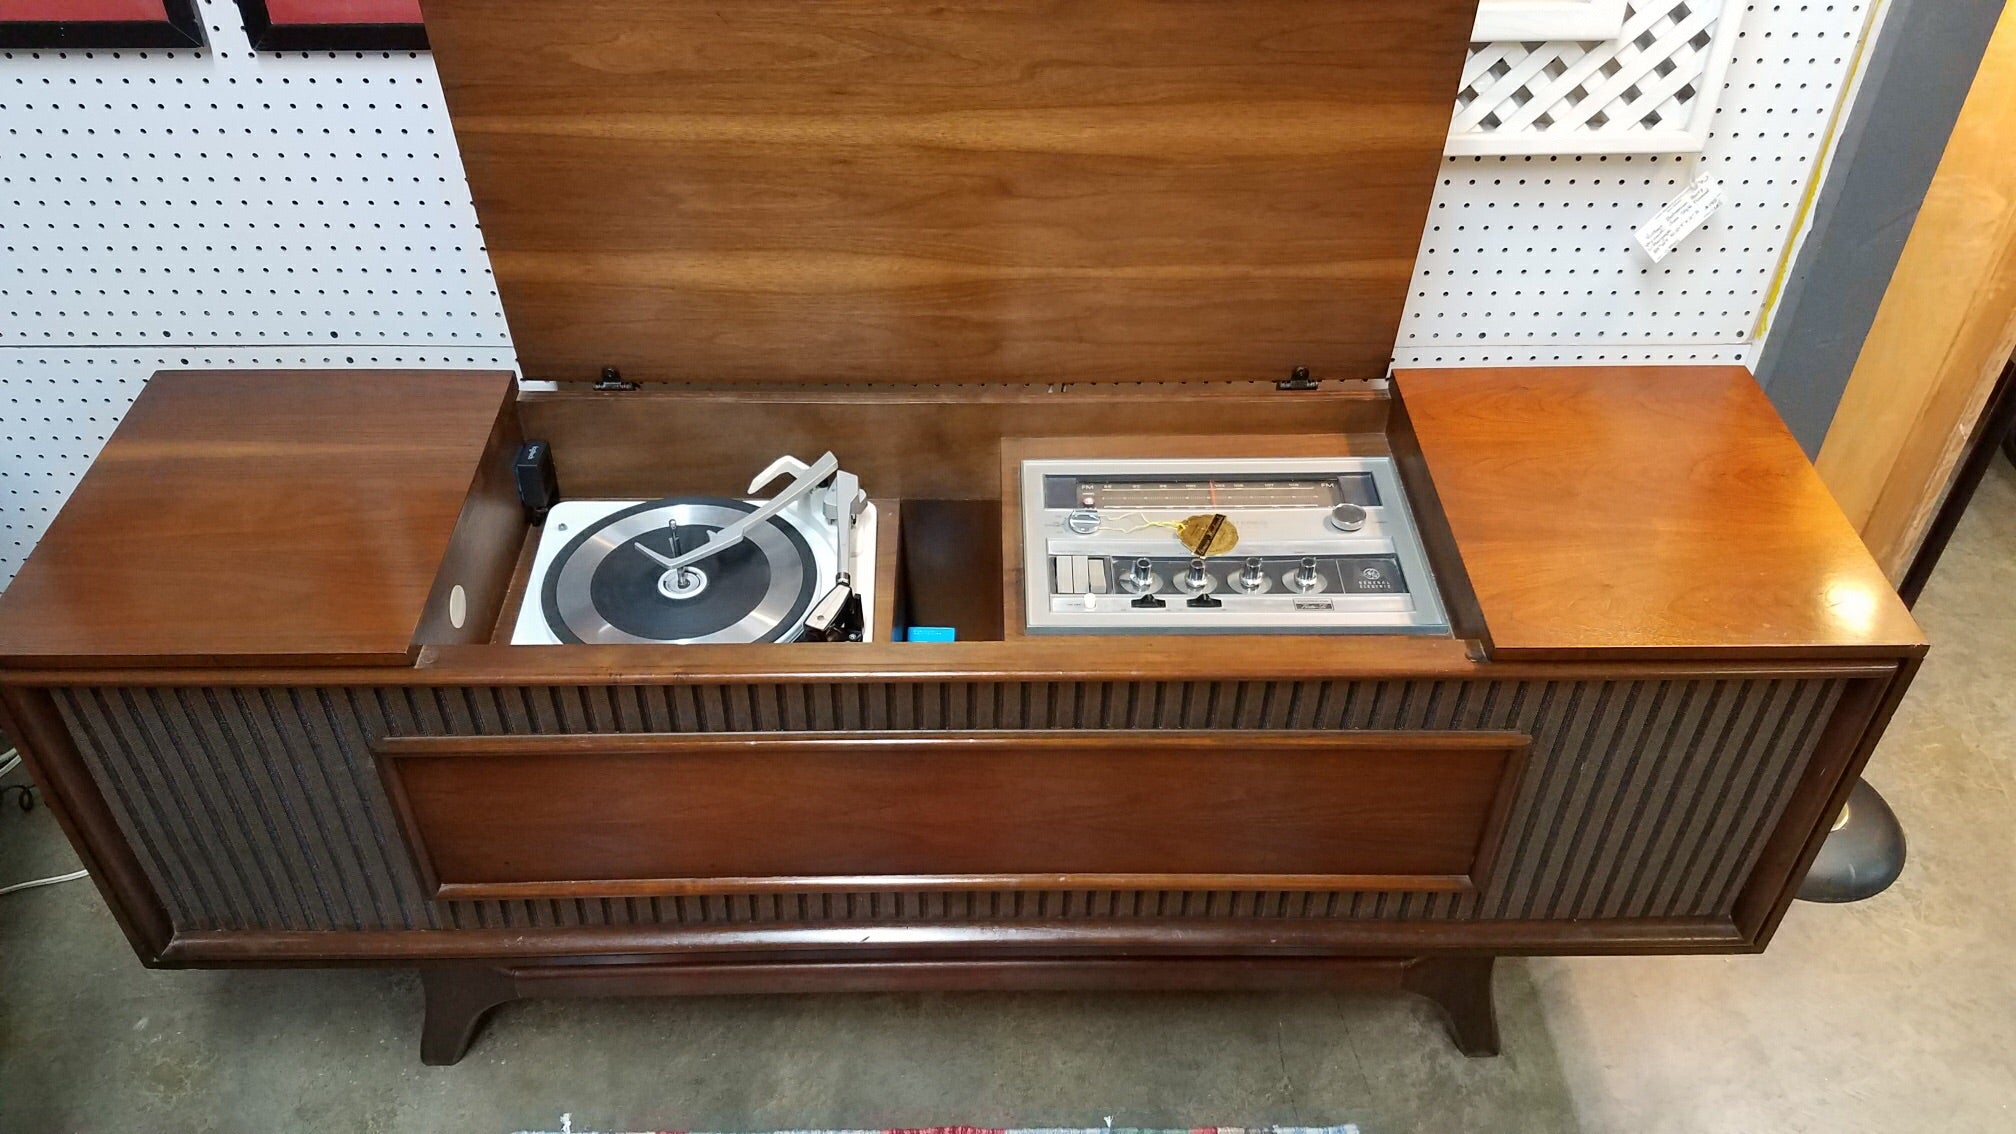 Creatice Record Player Console with Simple Decor